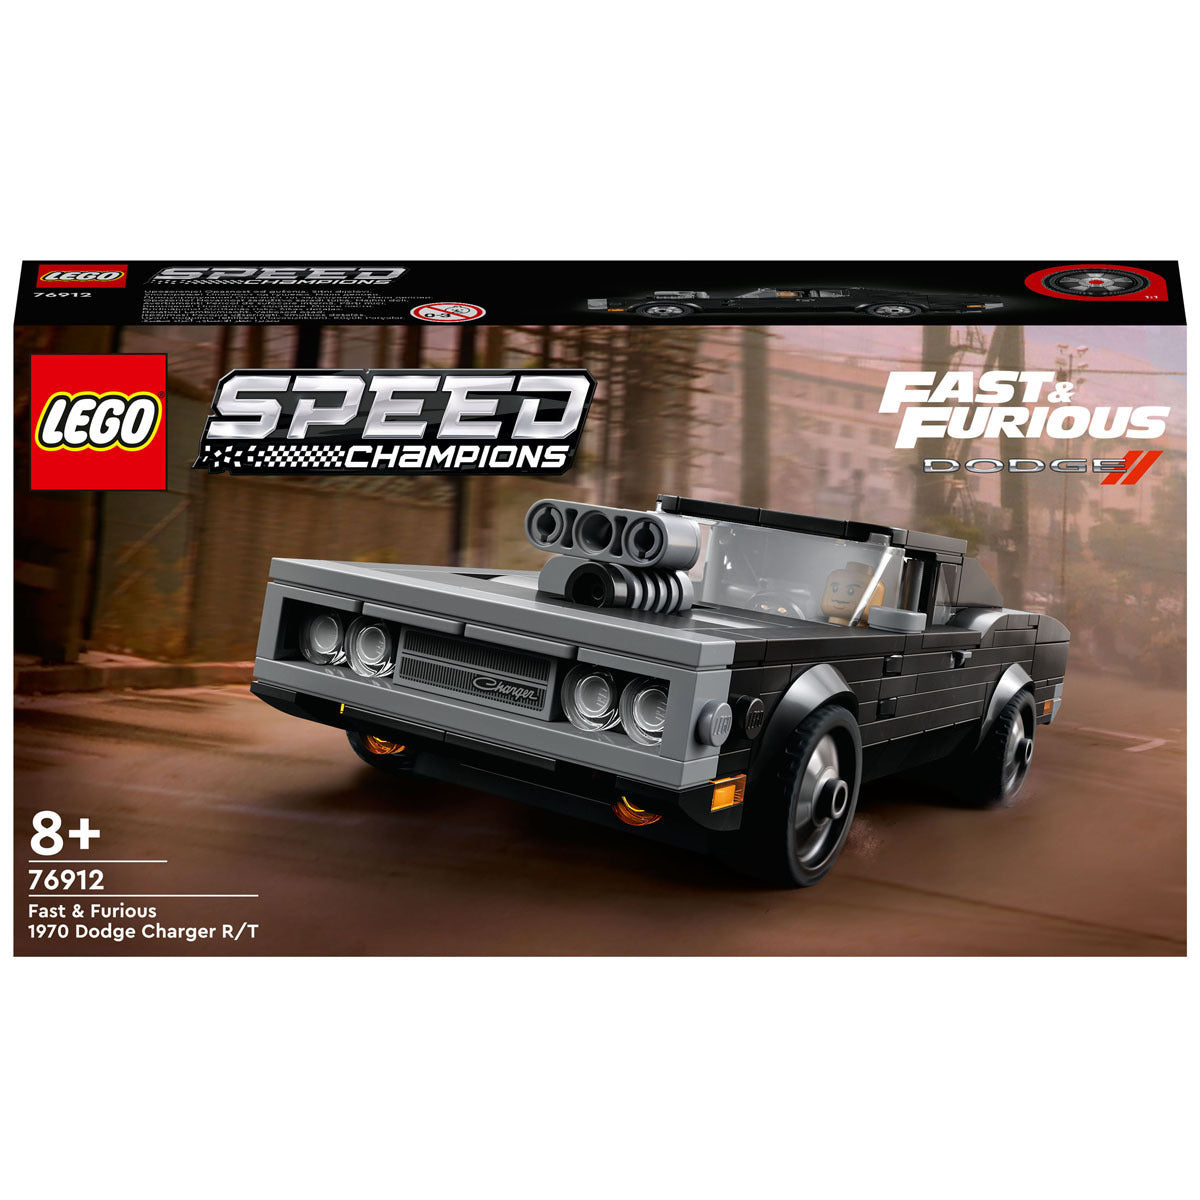 LEGO Speed Campions - Fast & Furious 1970 Dodge Charger R/T 76912